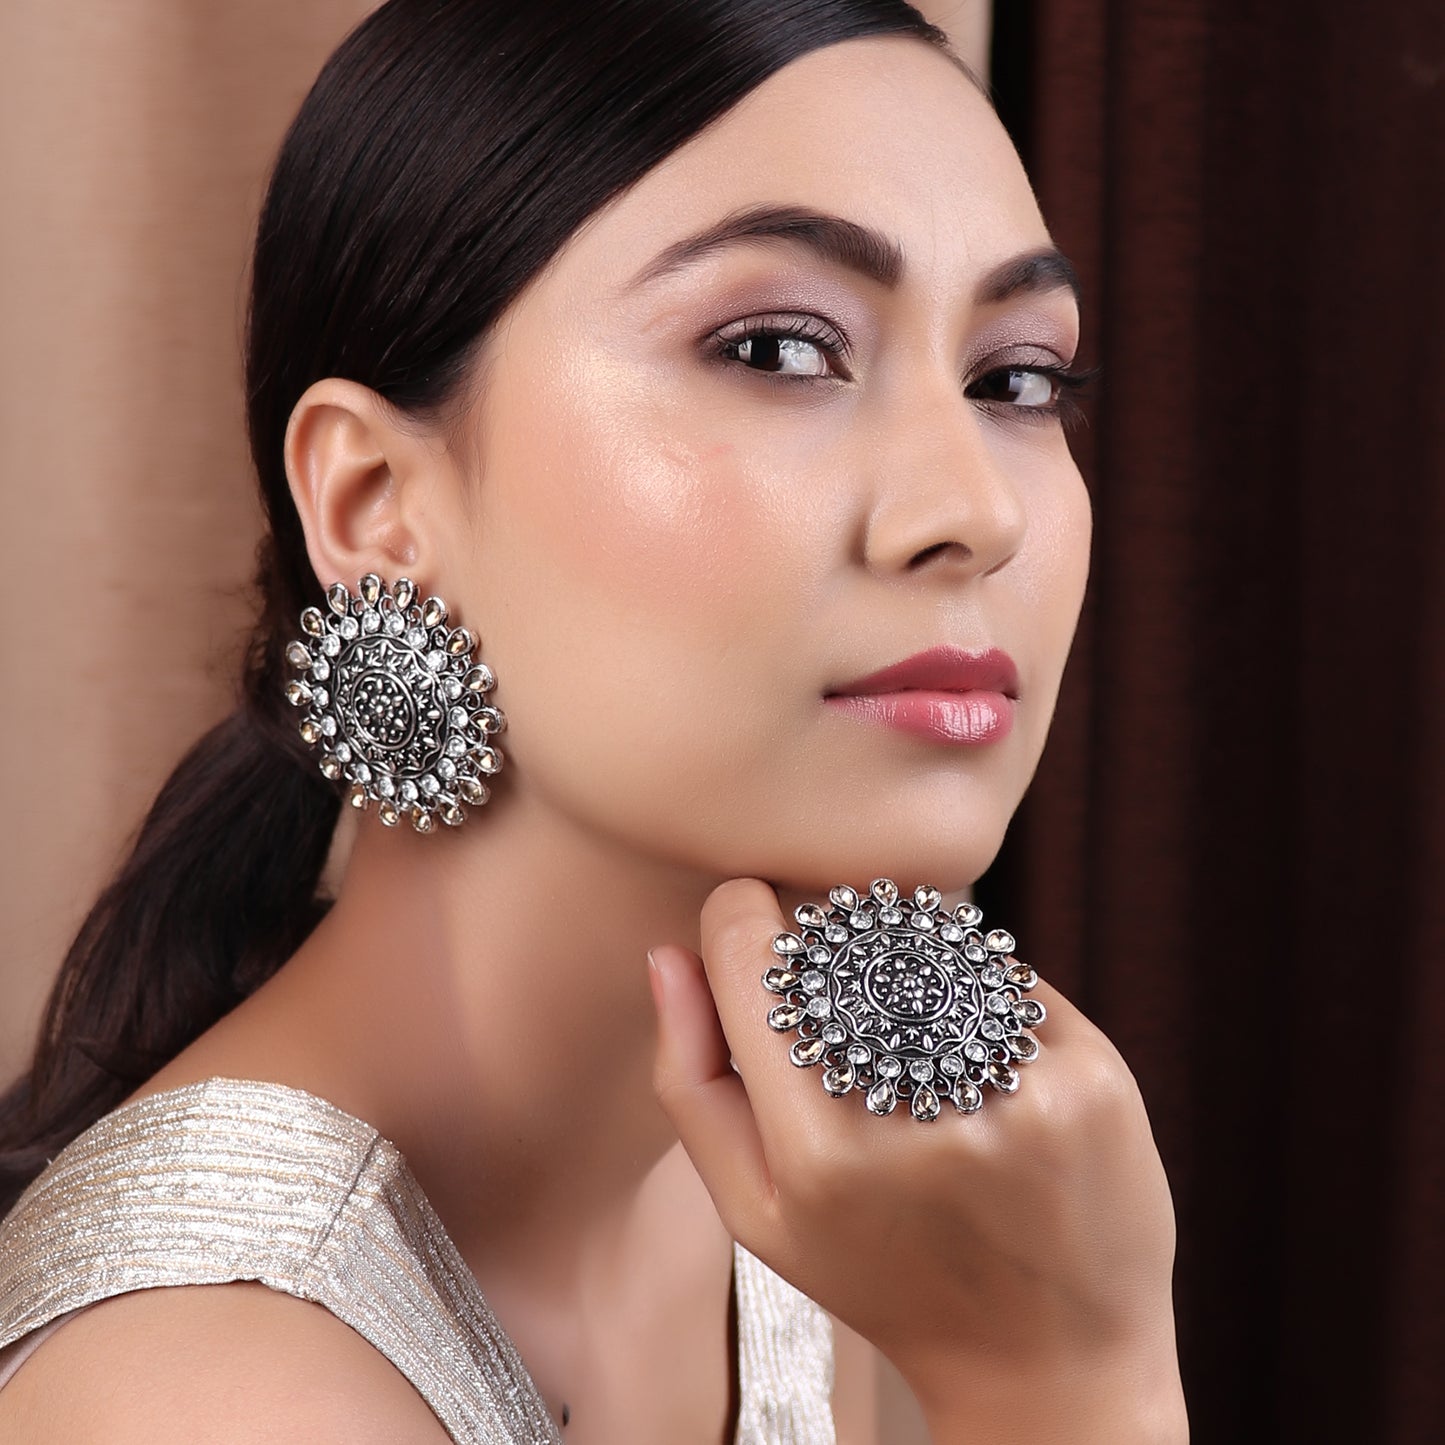 Ring & Earring Set,The Glorified Earring and The Ring set in White & Cream - Cippele Multi Store